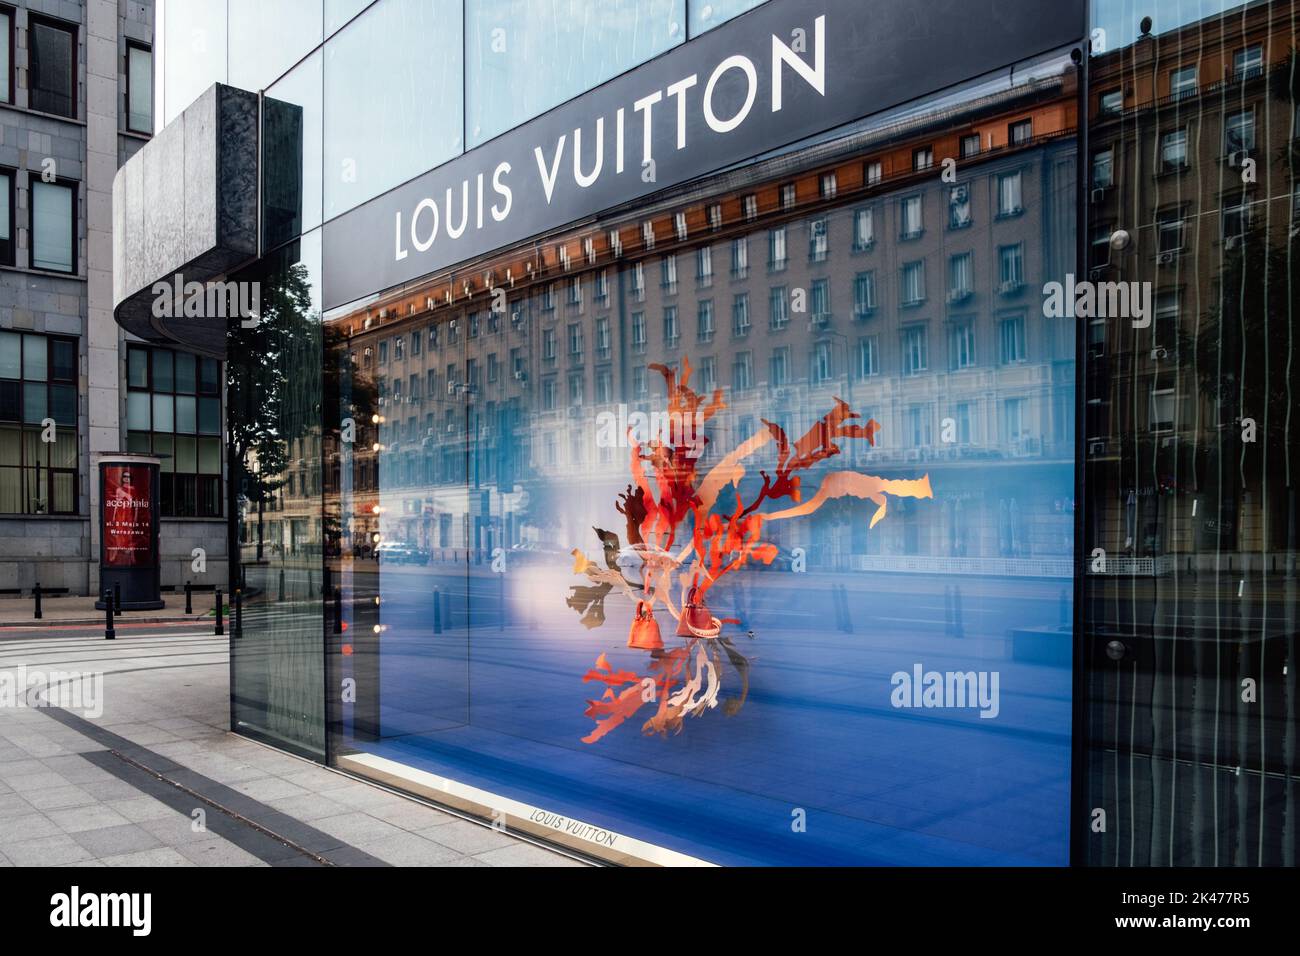 Shopping itineraries in Louis Vuitton Warsaw in August (updated in